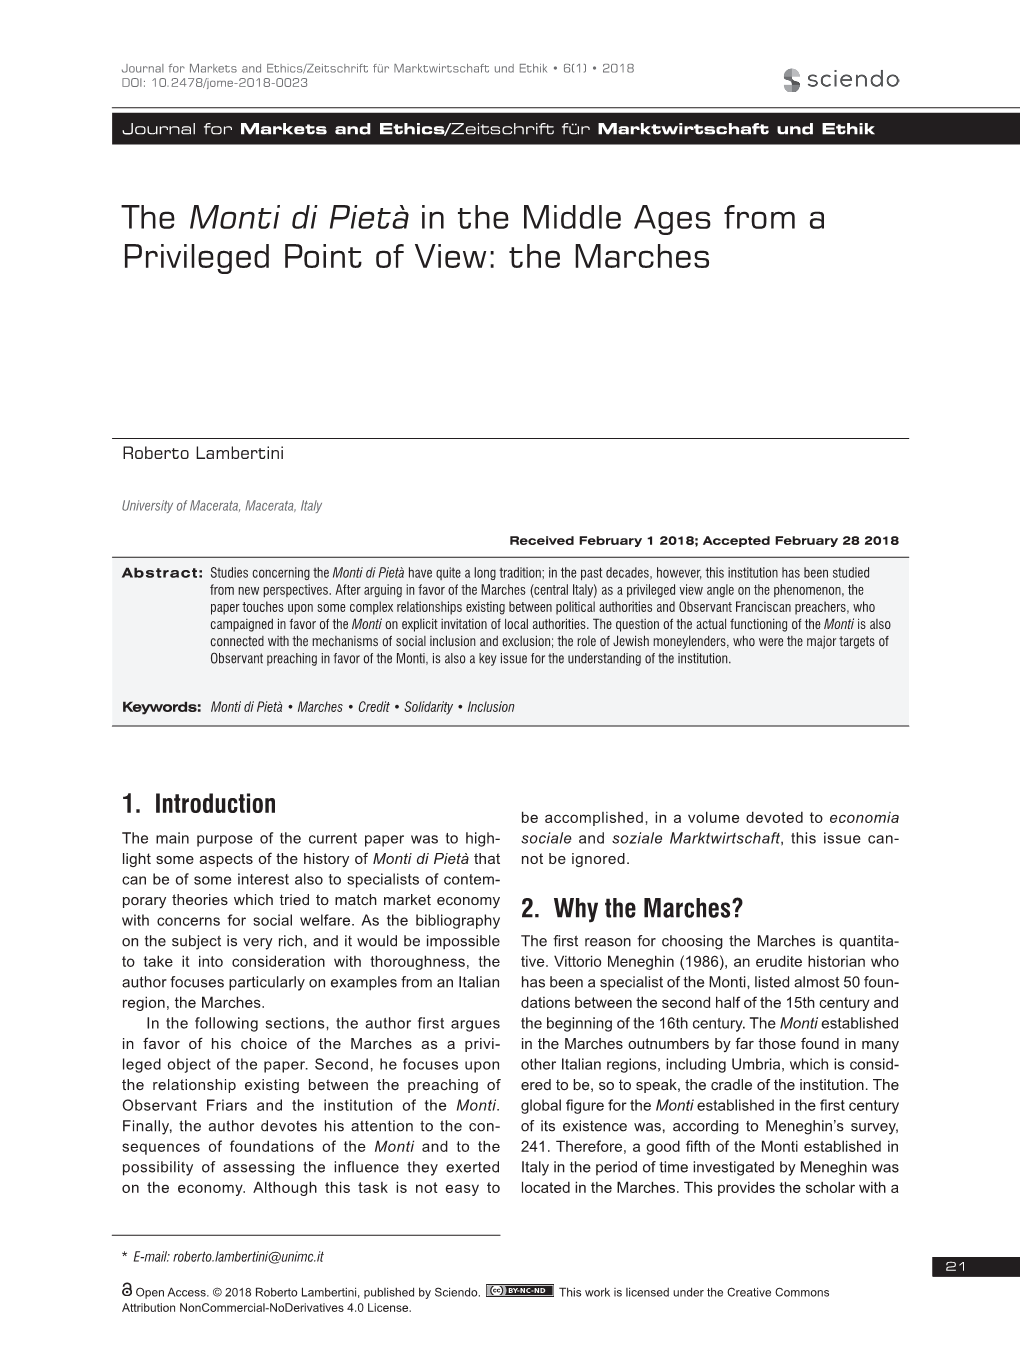 The Monti Di Pietà in the Middle Ages from a Privileged Point of View: the Marches